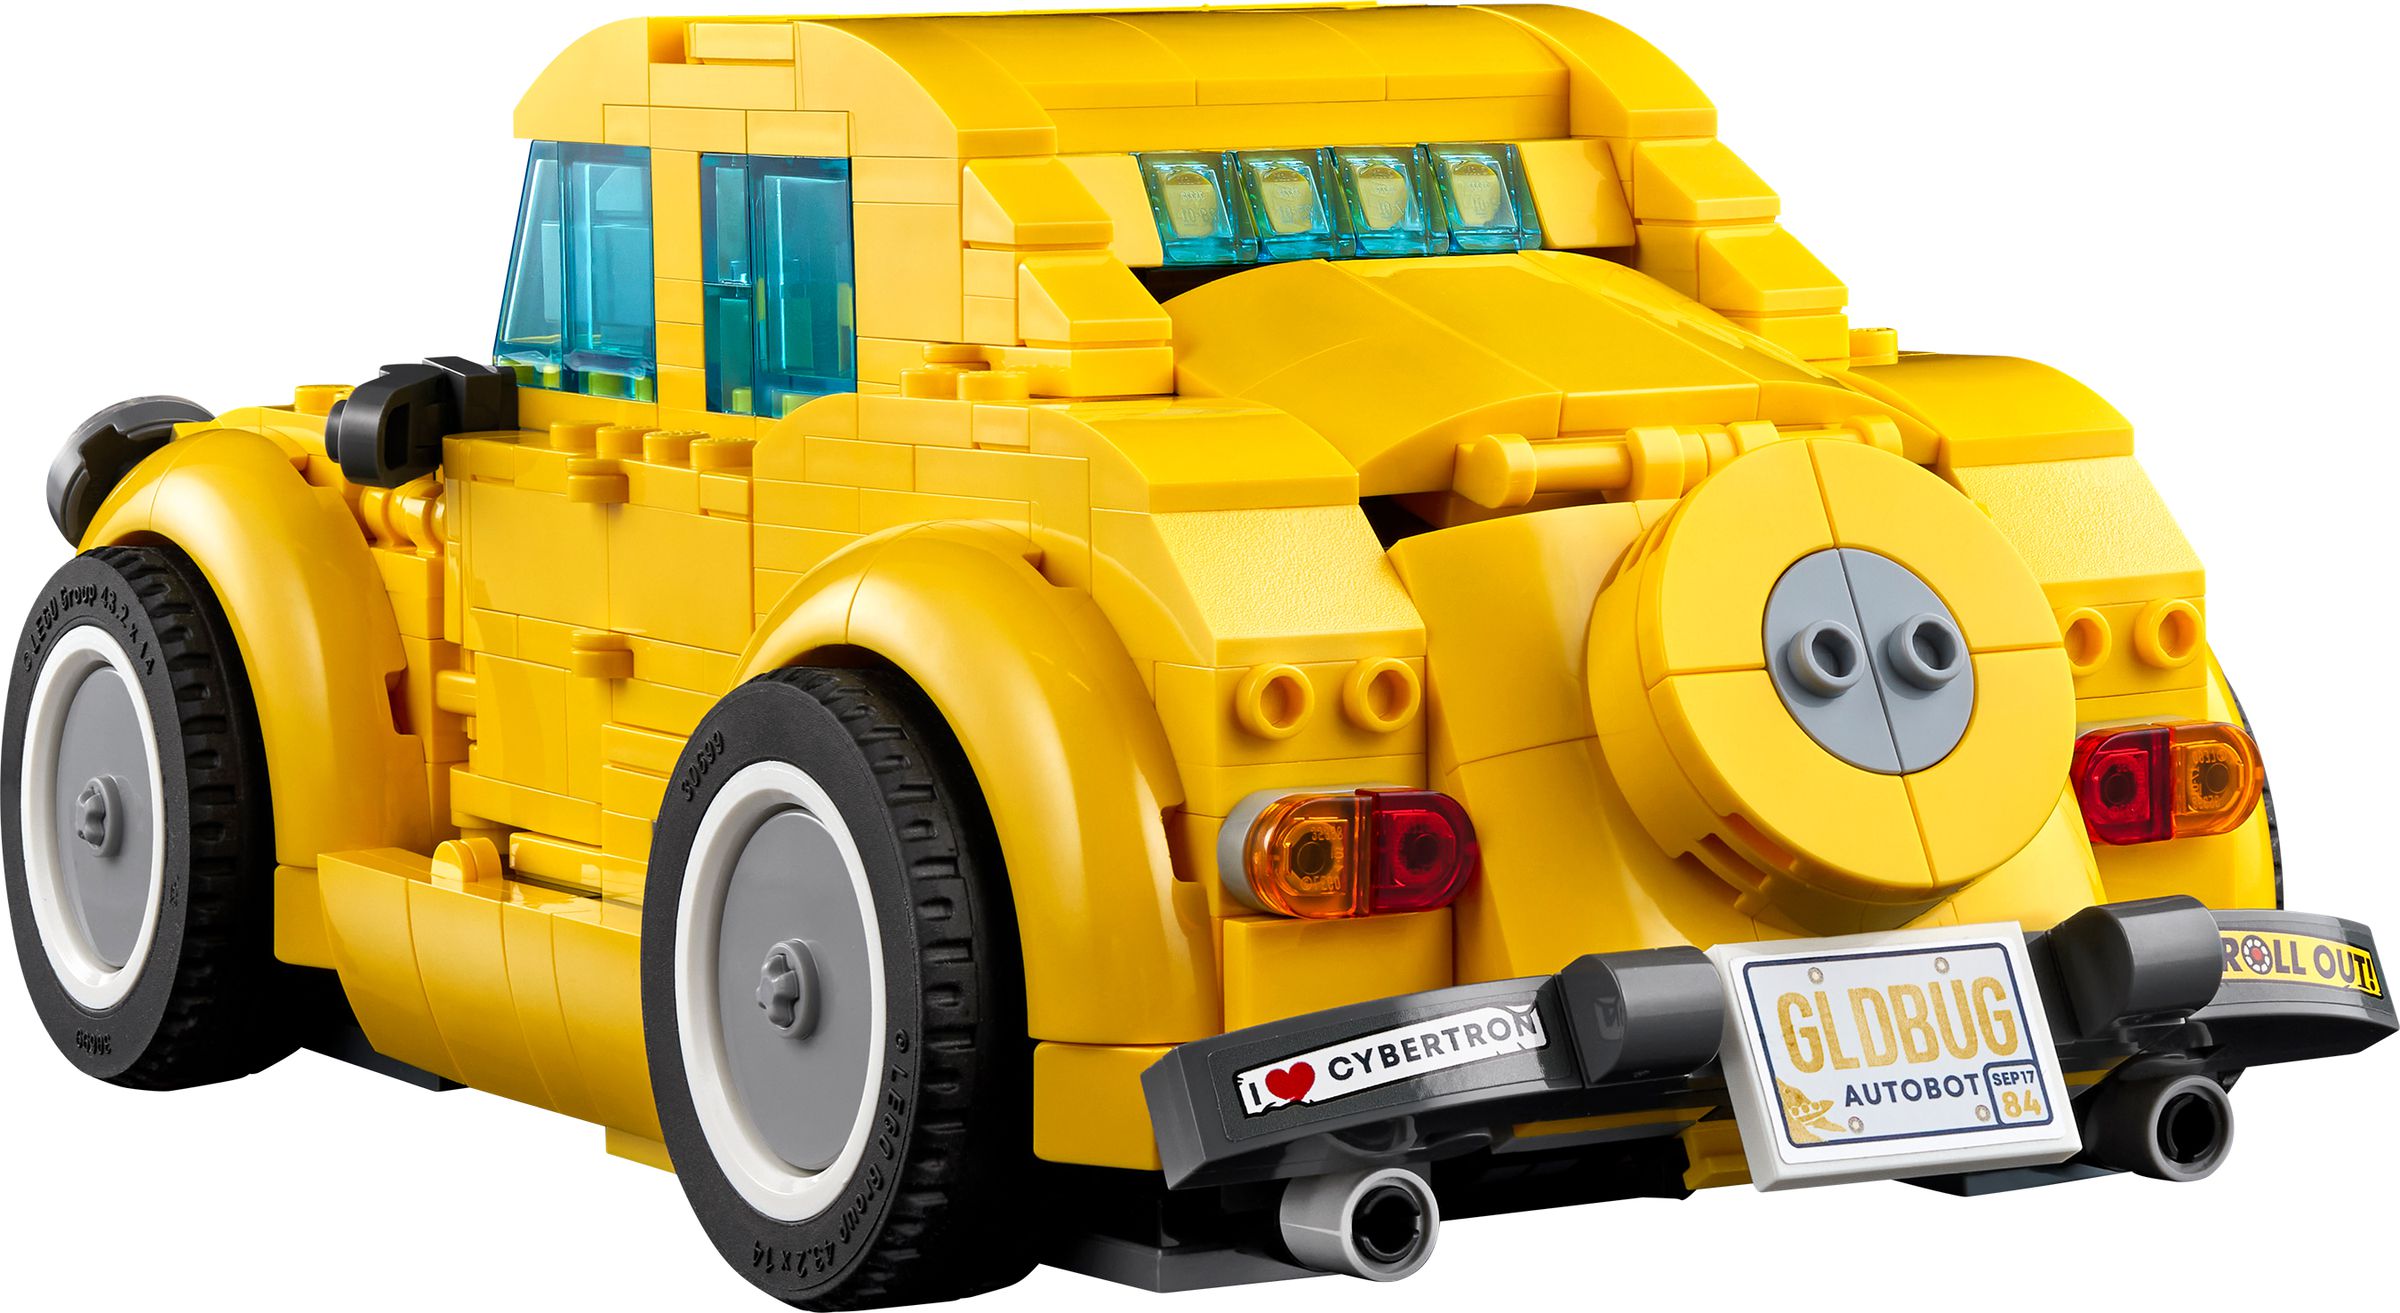 A look at the rear bumper of the Lego Bumblebee model in vehicle mode.